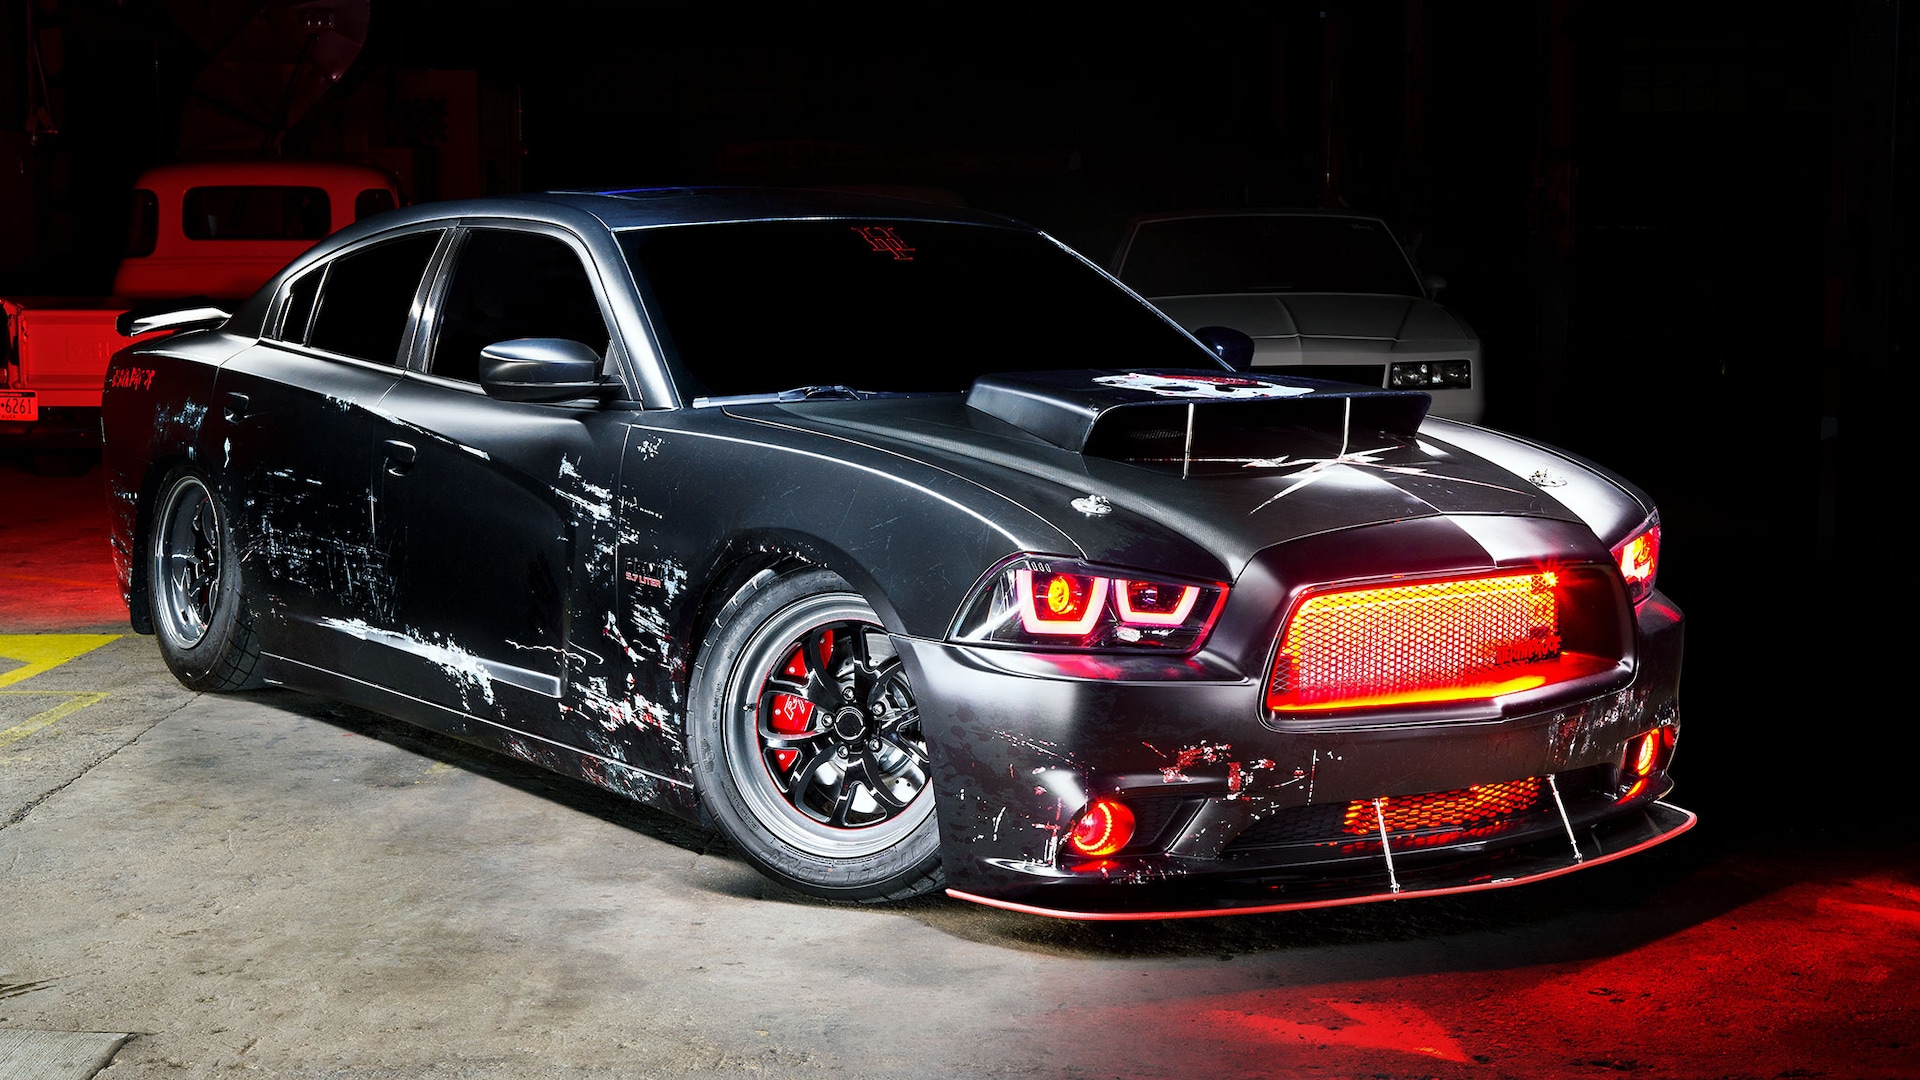 This 2011 Dodge Charger is Death Proof